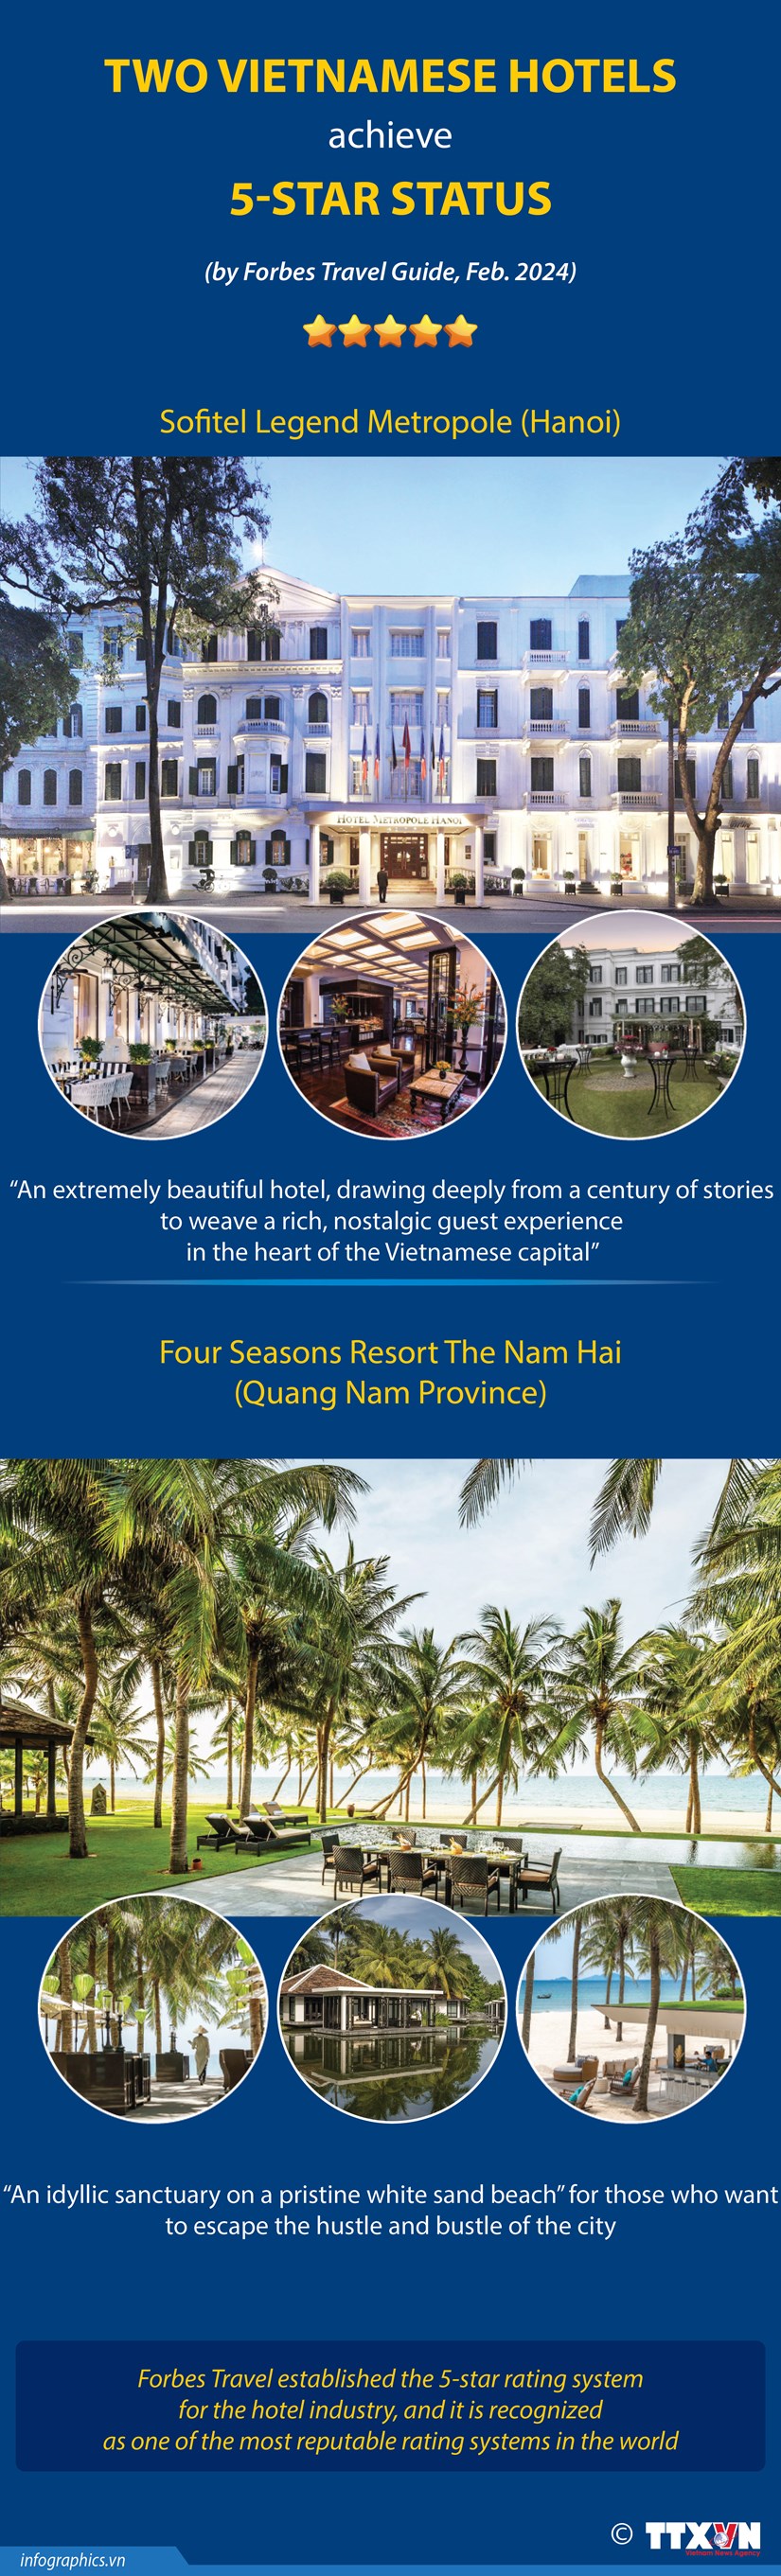 Two Vietnamese hotels achieve 5-star status hinh anh 1